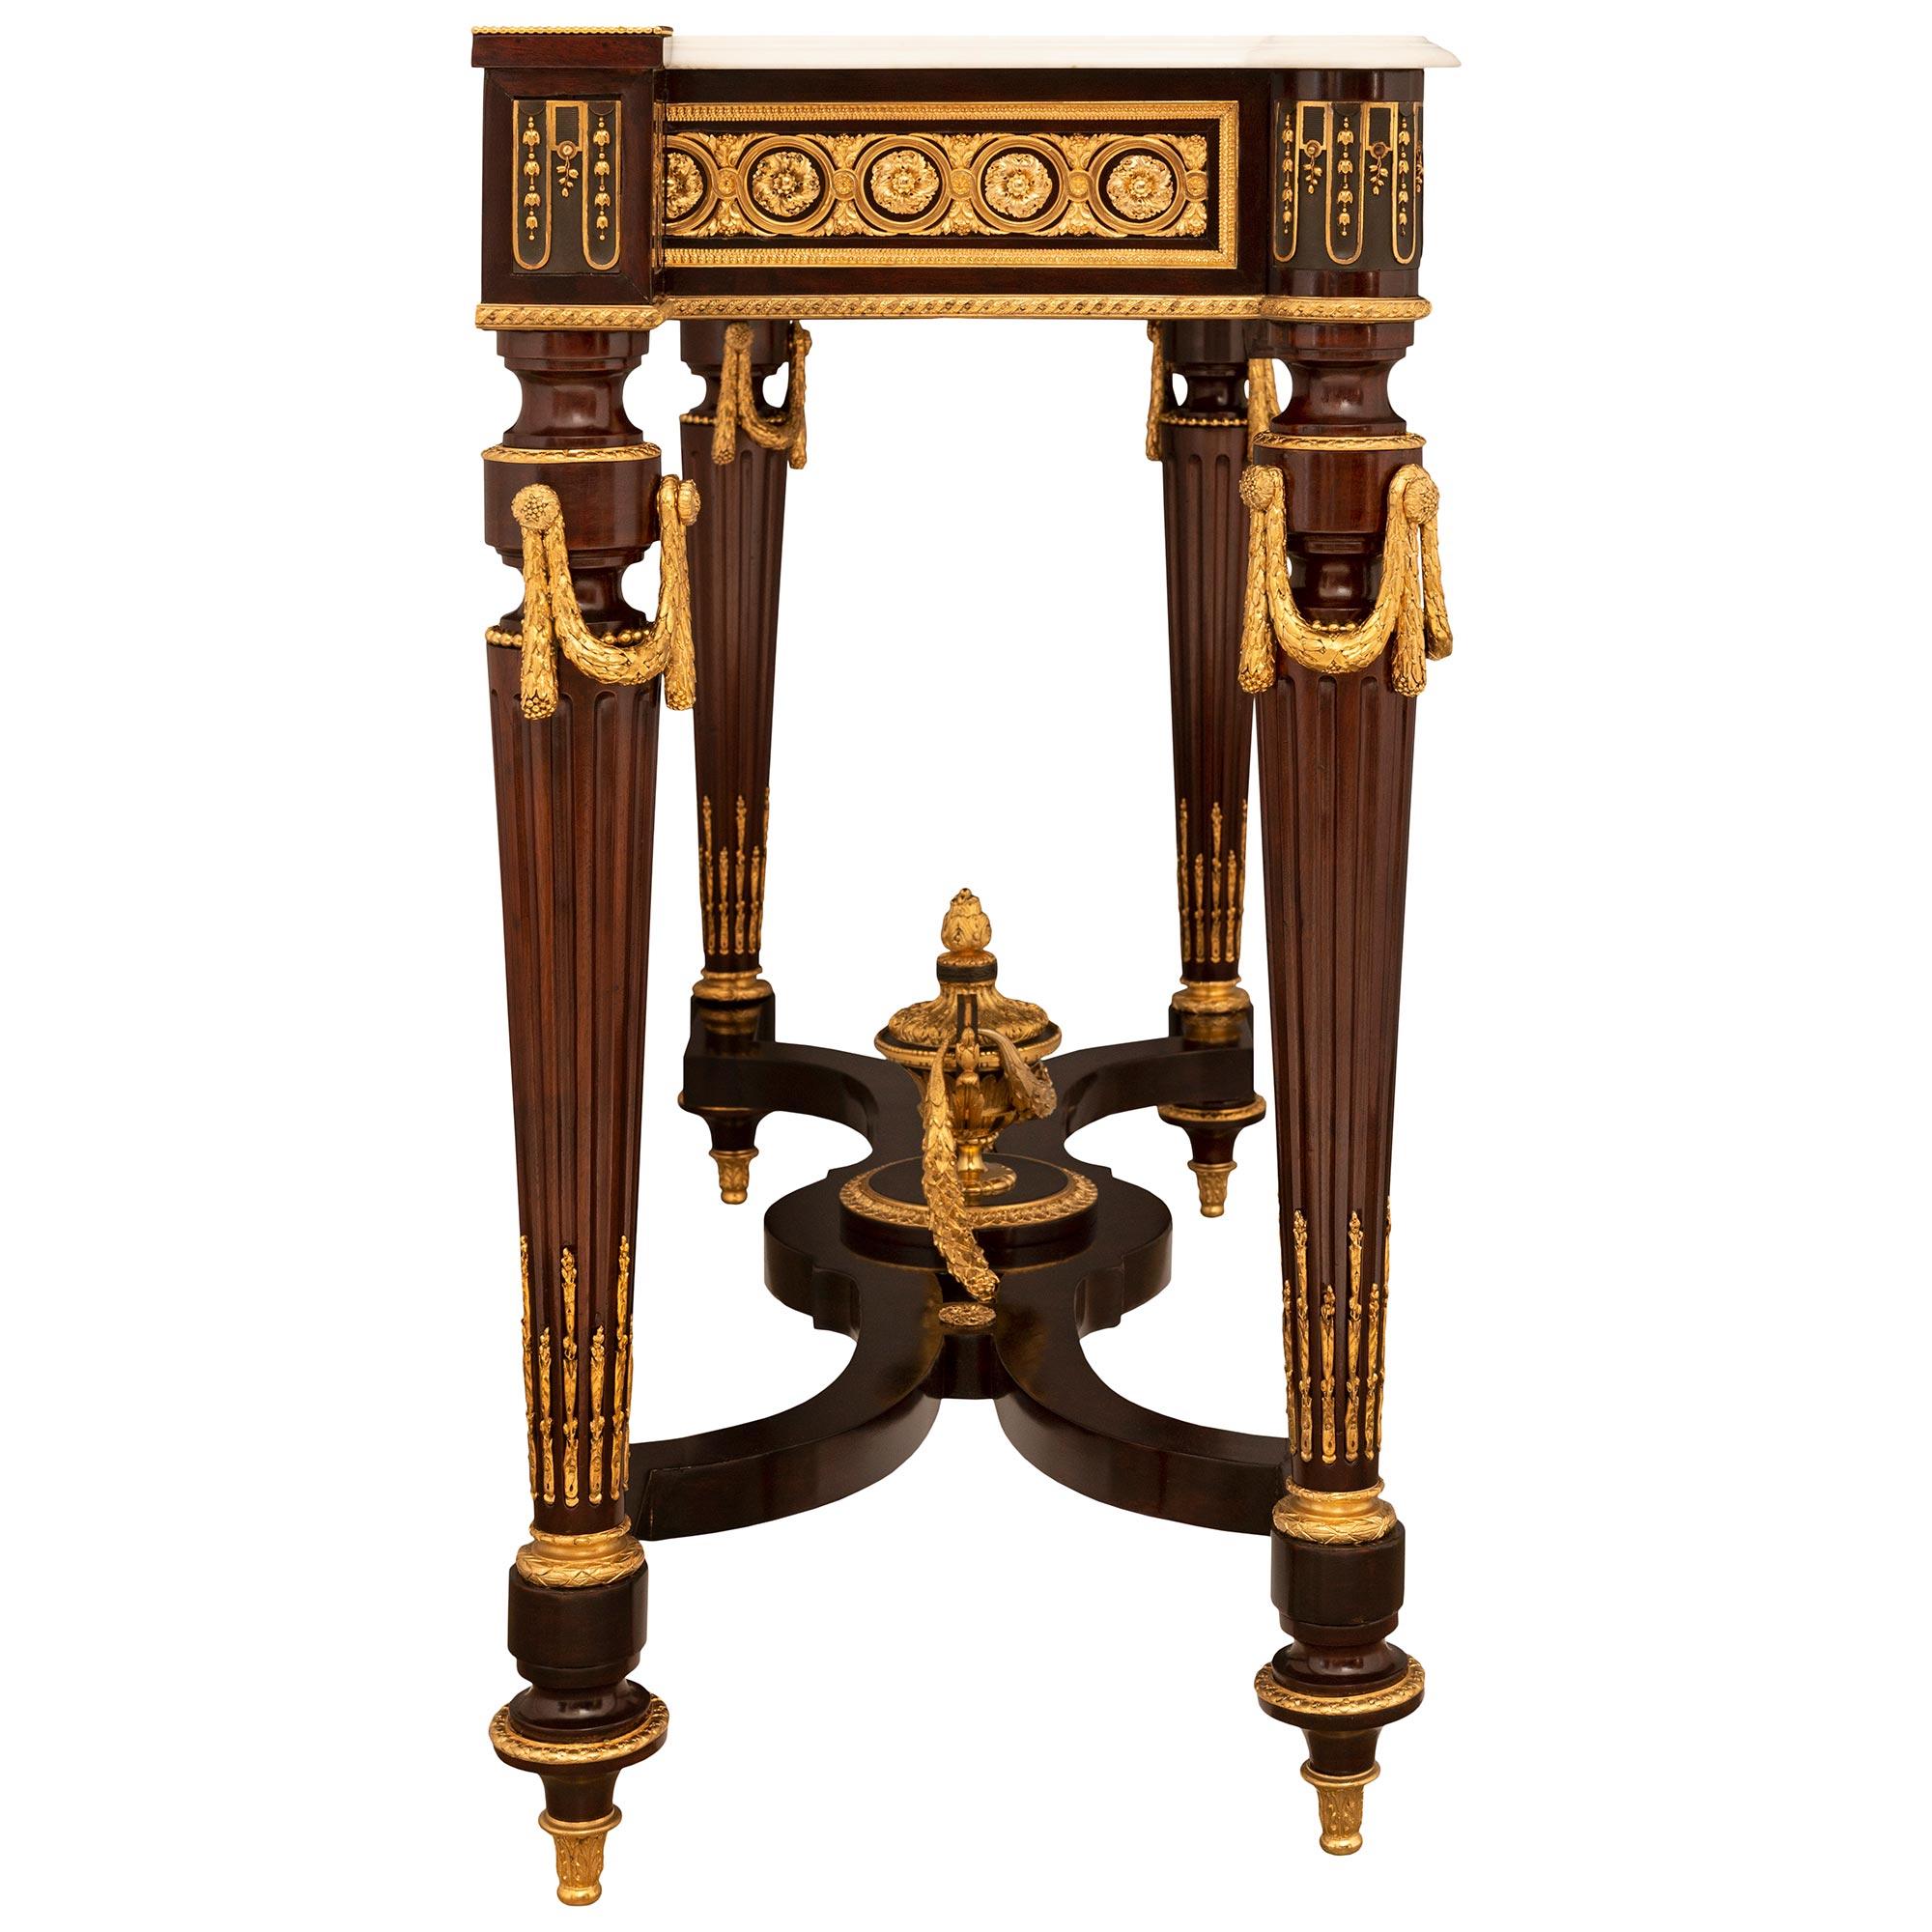 Patinated French 19th Century Napoleon III Period Mahogany, Ormolu and Marble Console For Sale